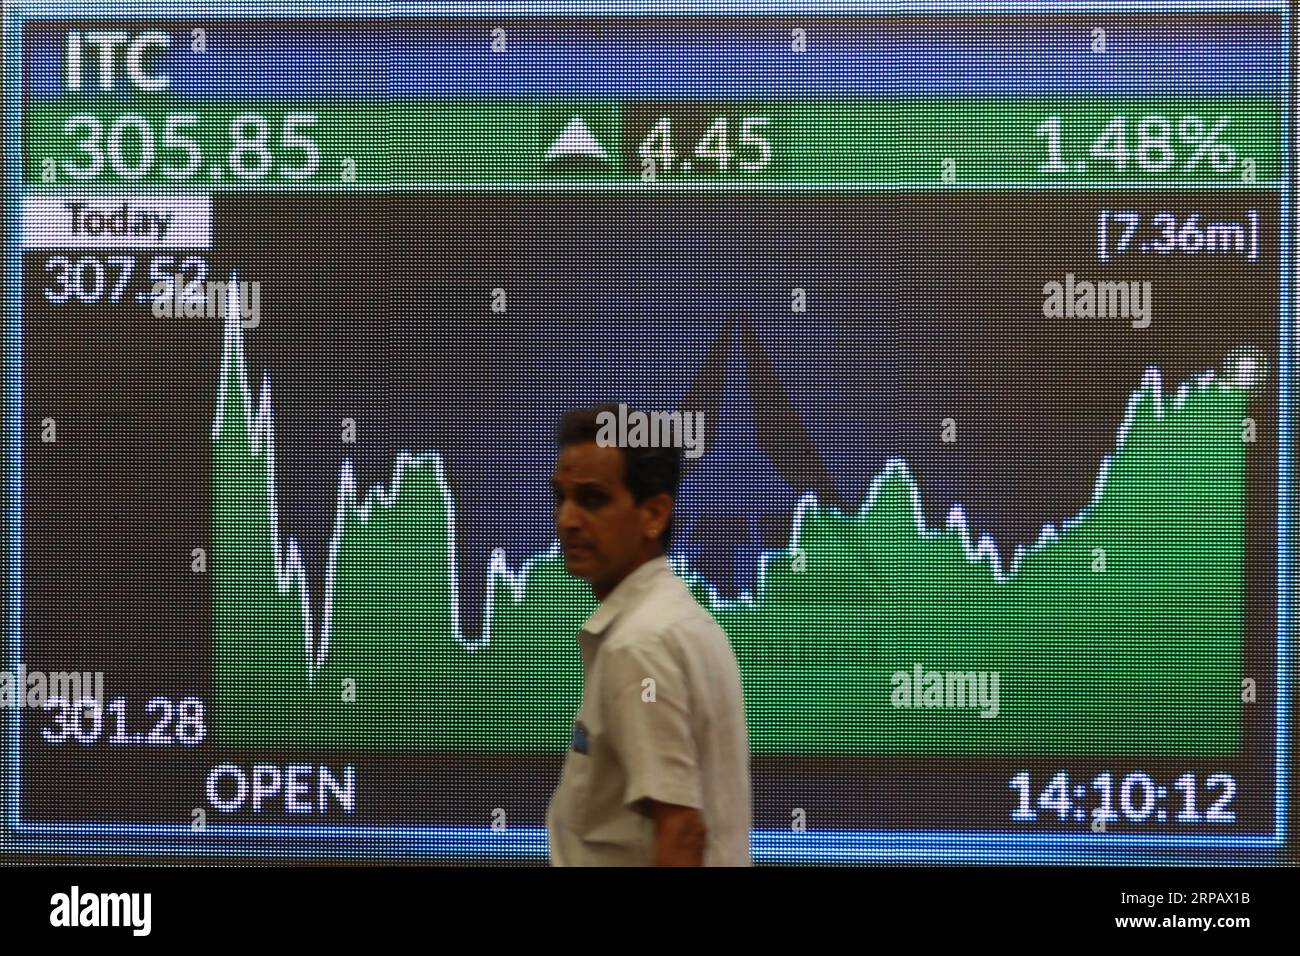 (190520) -- MUMBAI, May 20, 2019 () -- A man walks past a screen at the entrance of the Bombay Stock Exchange (BSE) in Mumbai, India, May 20, 2019. Stock markets in India closed on a bullish note on Monday after exit polls predicted that the Bharatiya Janta Party (BJP)-led National Democratic Alliance will form its second consecutive government. (/Stringer) INDIA-MUMBAI-ECONOMY-STOCK MARKET Xinhua PUBLICATIONxNOTxINxCHN Stock Photo